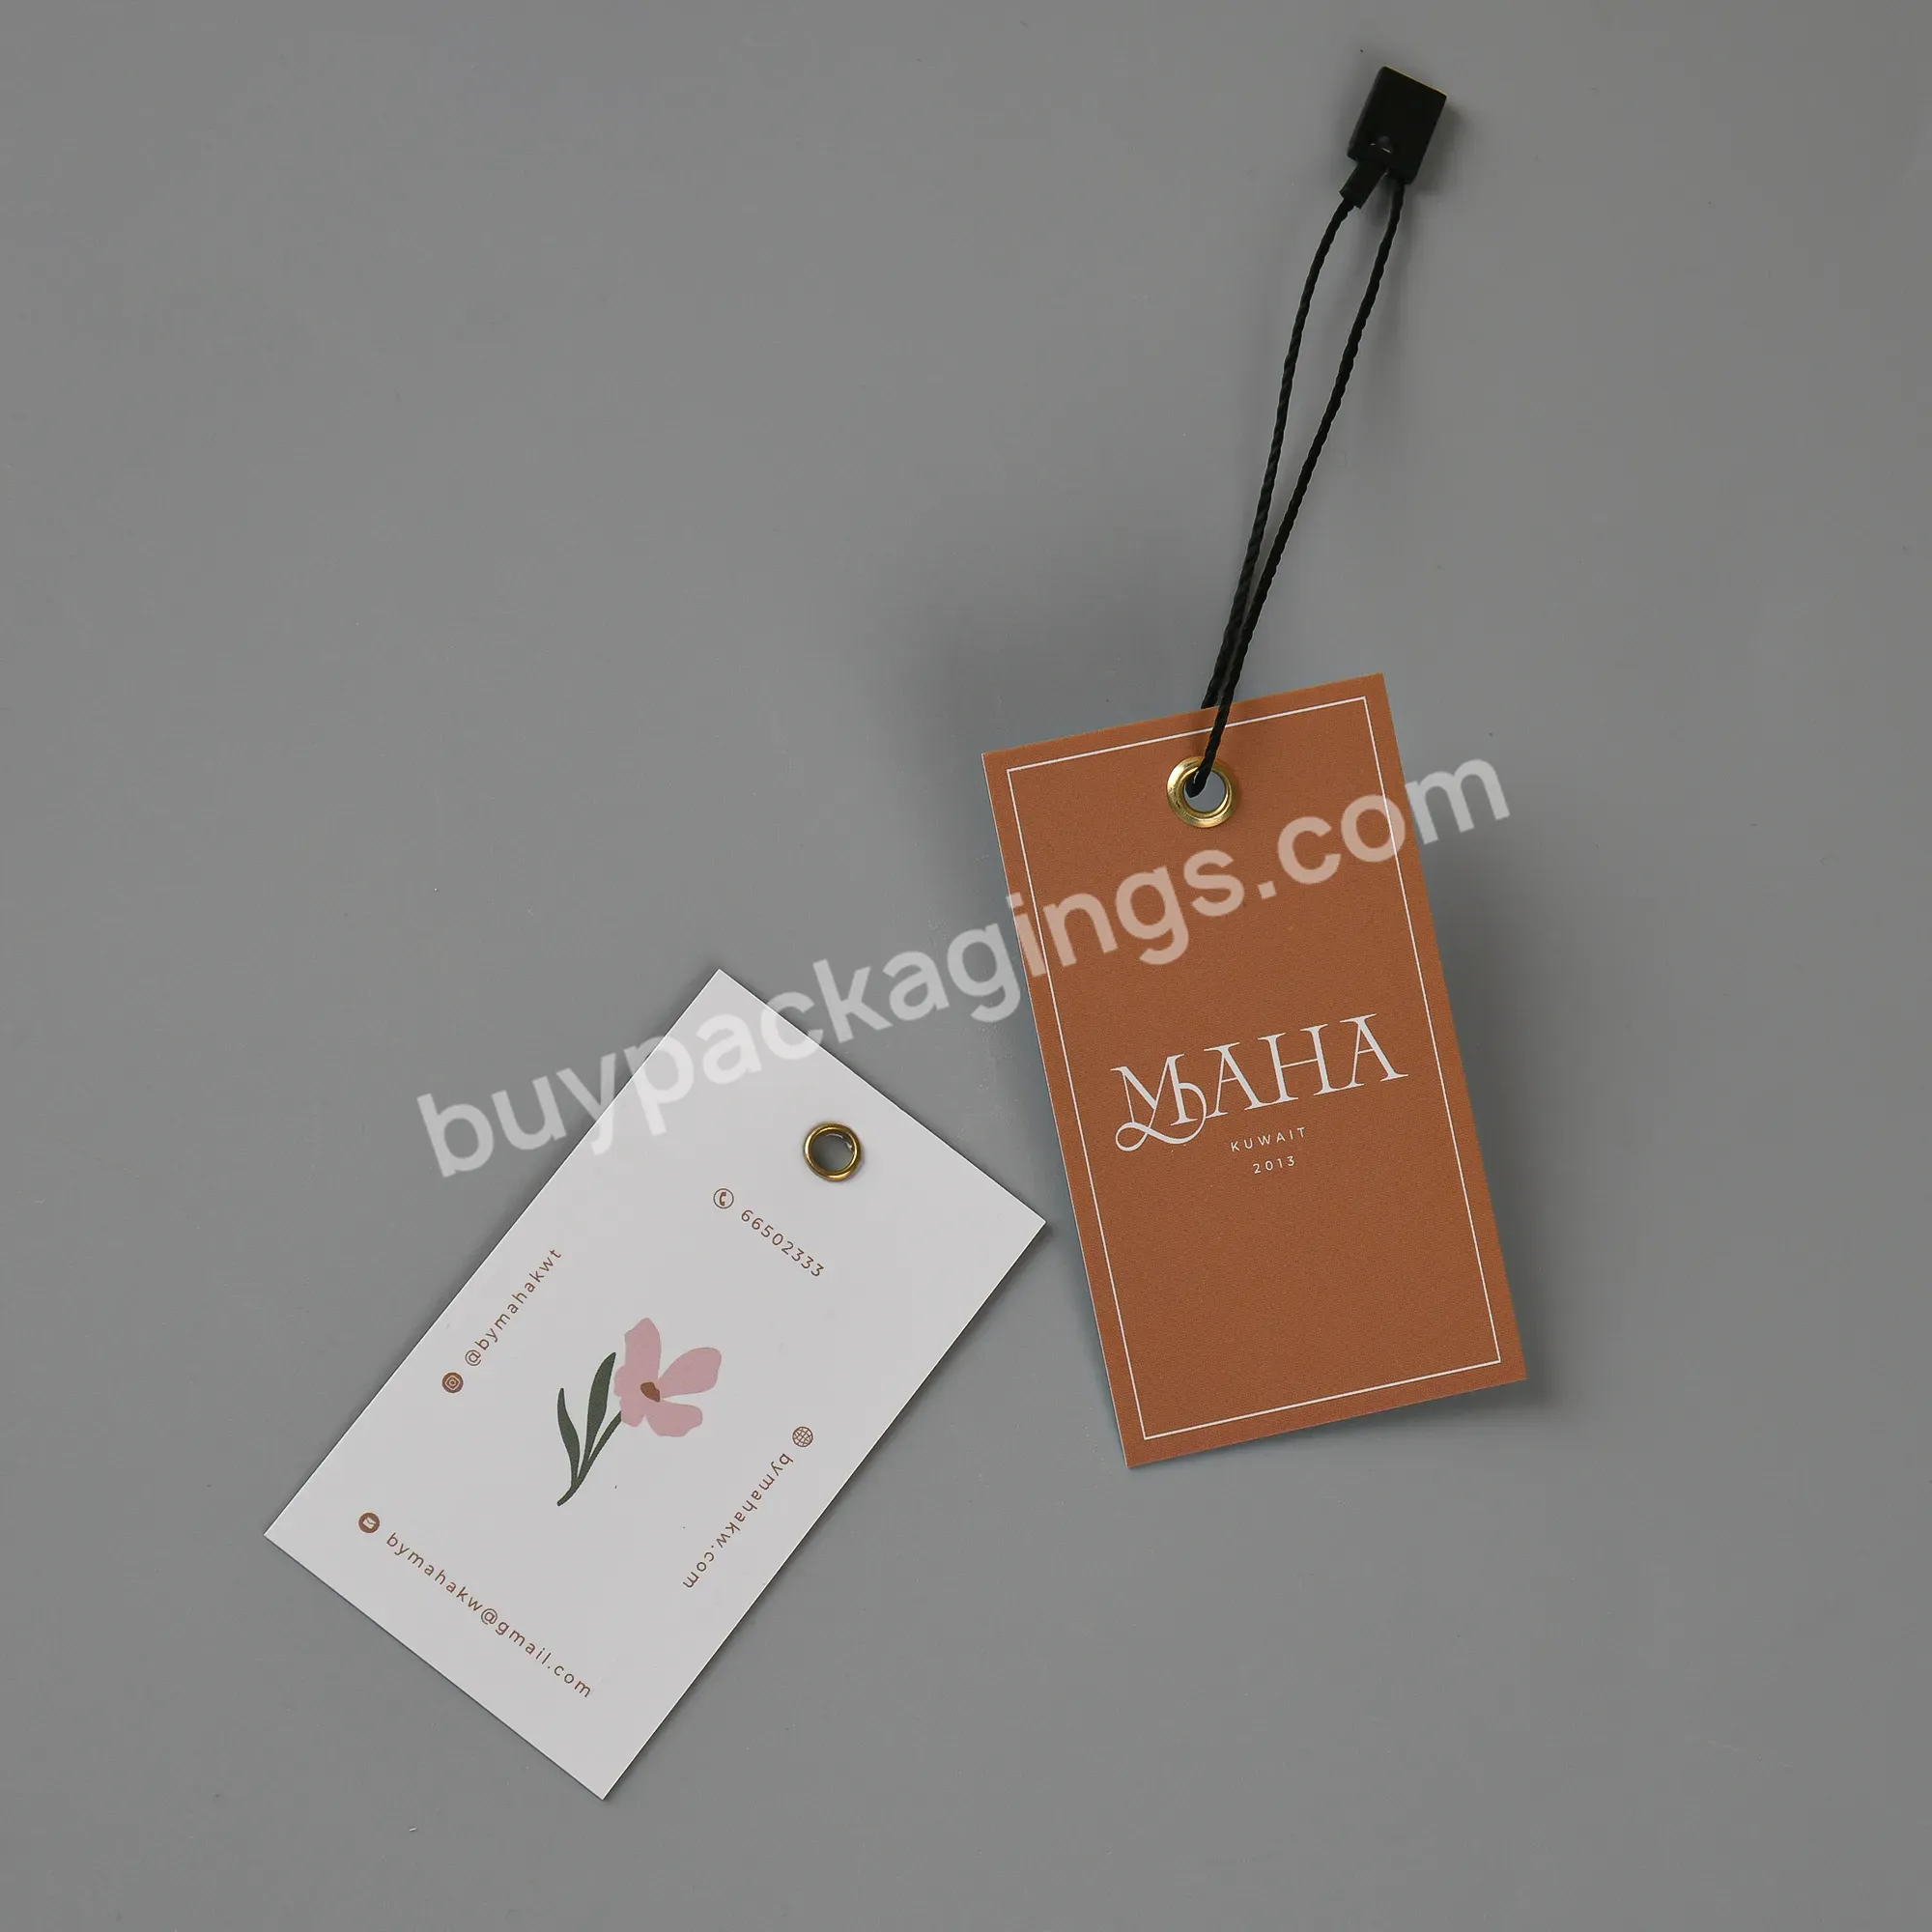 Design Logo Biodegradable Shoe And Clothing Tags And Labels Hang Apparel Label Tag For Seal - Buy Shoe And Clothing Hang Tags,Design Logo Pvc Biodegradable Shoe And Clothing Hang Tags,Design Logo Pvc Biodegradable Shoe And Clothing Hang Tags For Seal.